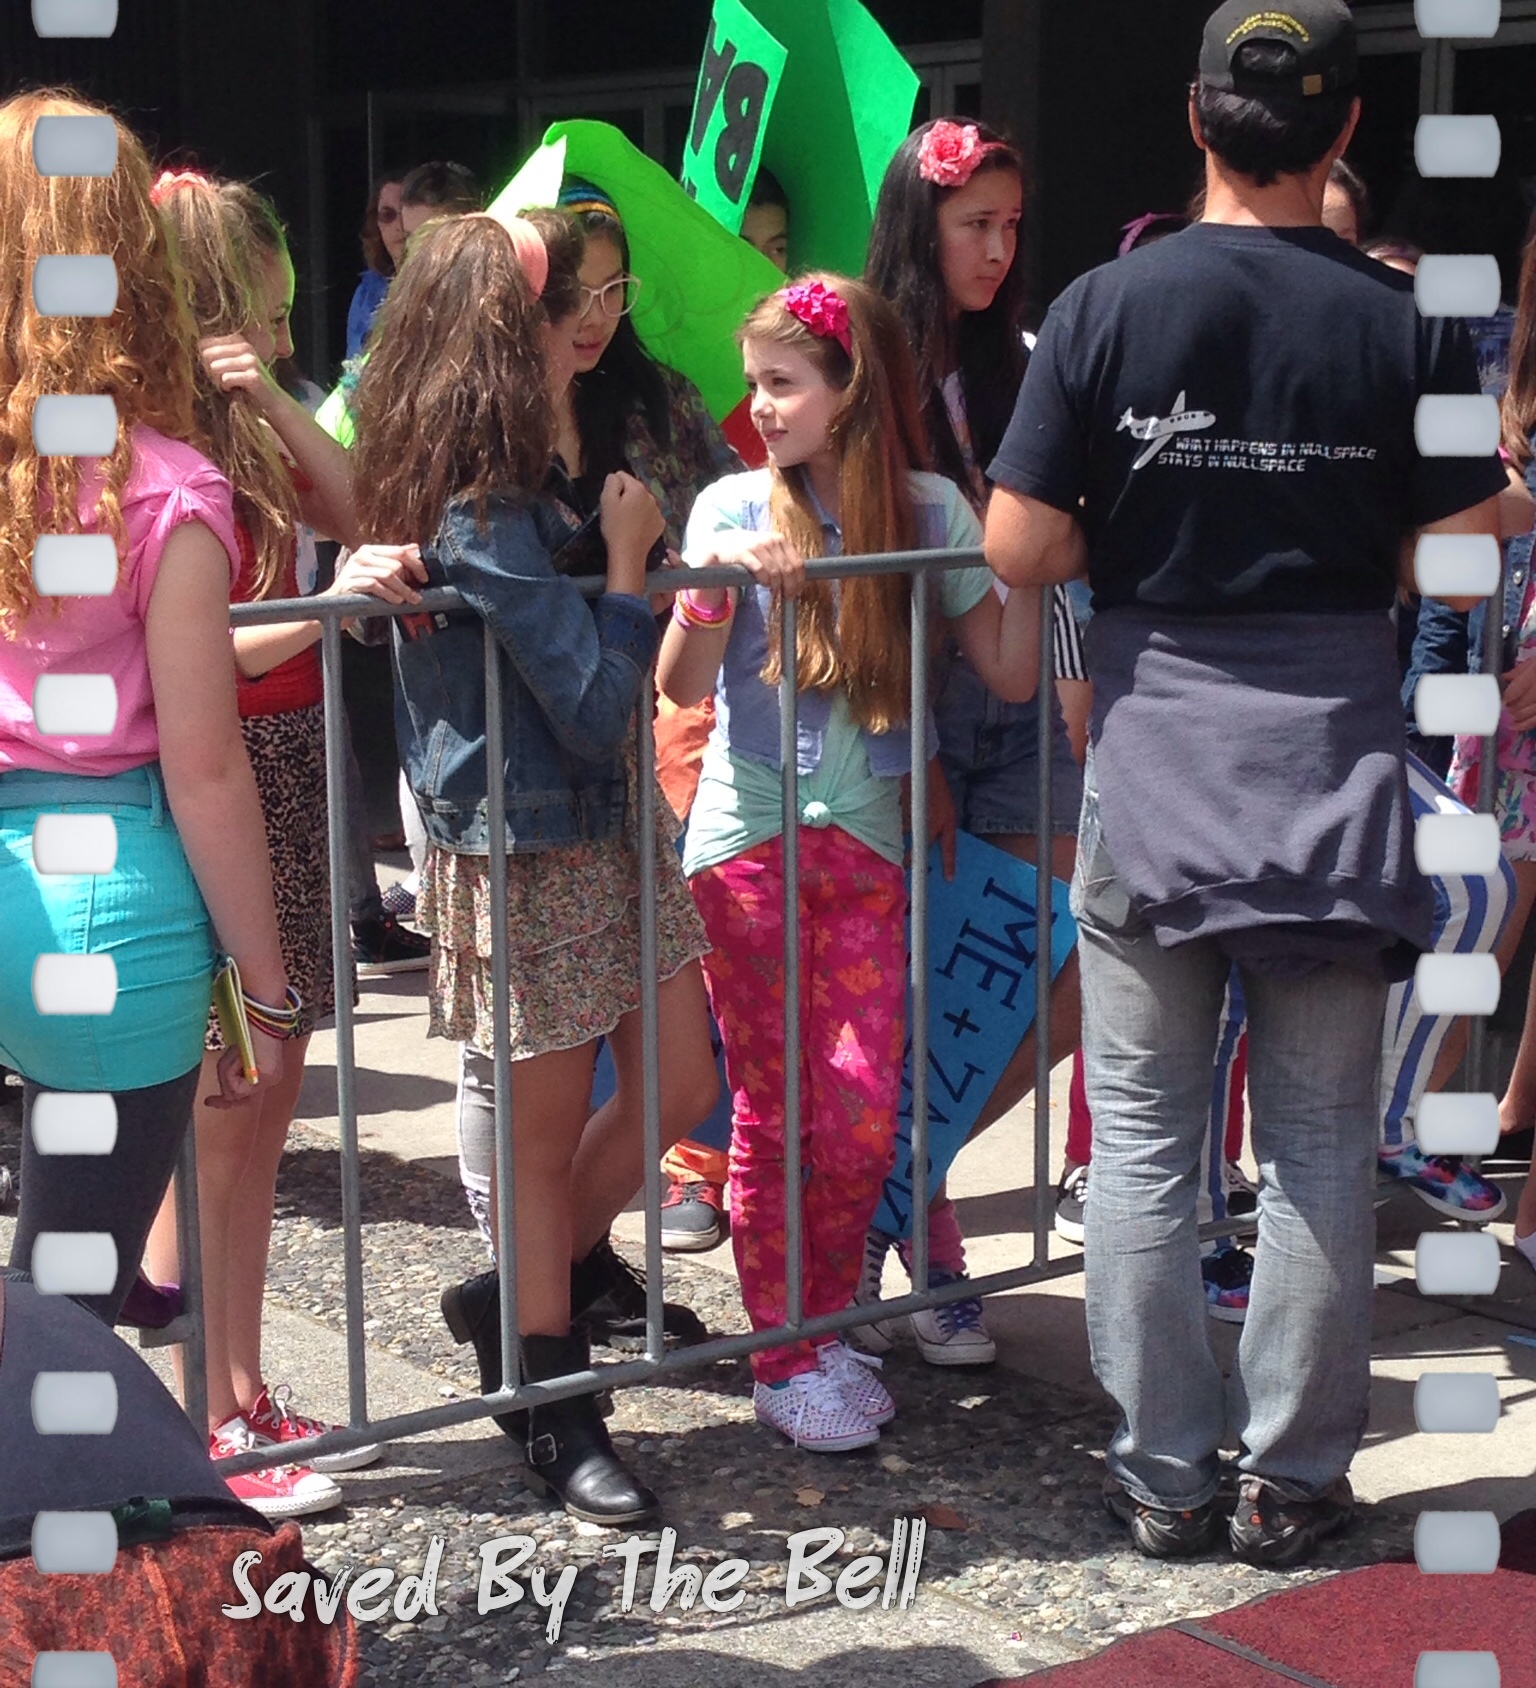 Jordyn Ashley Olson on set of The Unauthorized Saved by the Bell Story